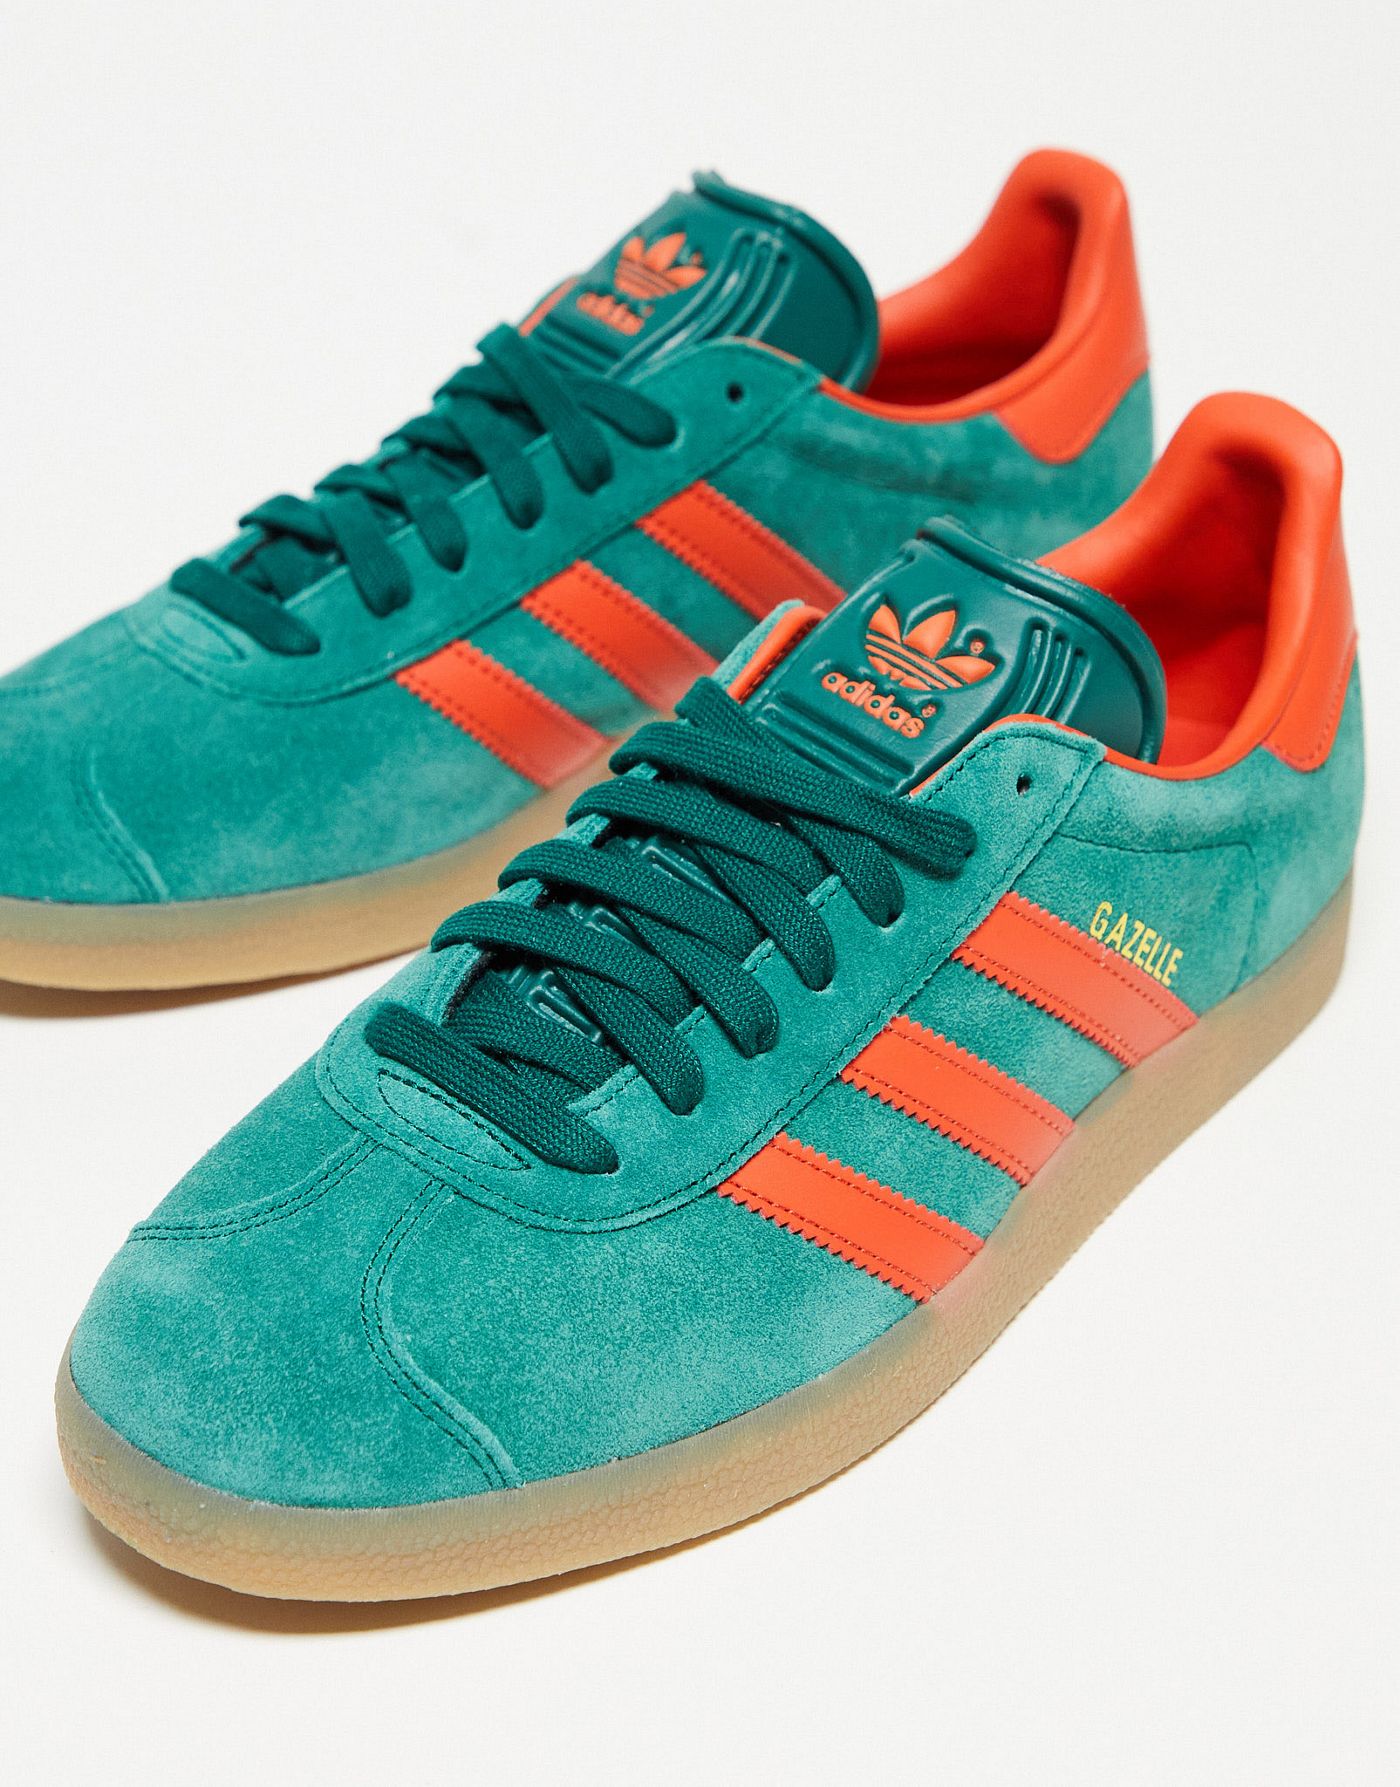 adidas Originals Gazelle trainers in green and red